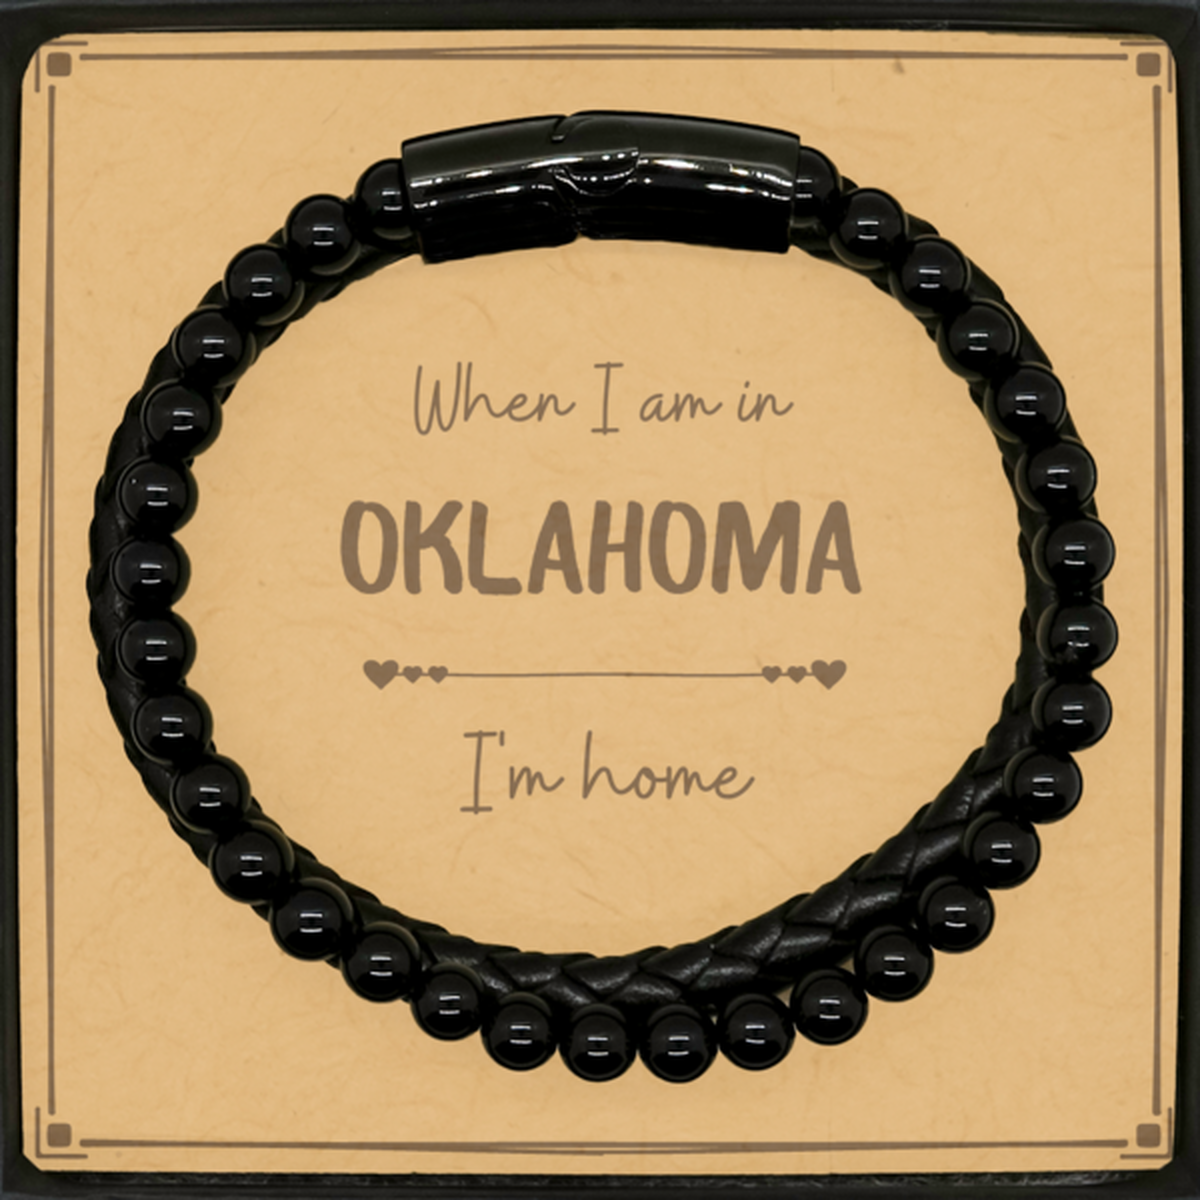 When I am in Oklahoma I'm home Stone Leather Bracelets, Message Card Gifts For Oklahoma, State Oklahoma Birthday Gifts for Friends Coworker